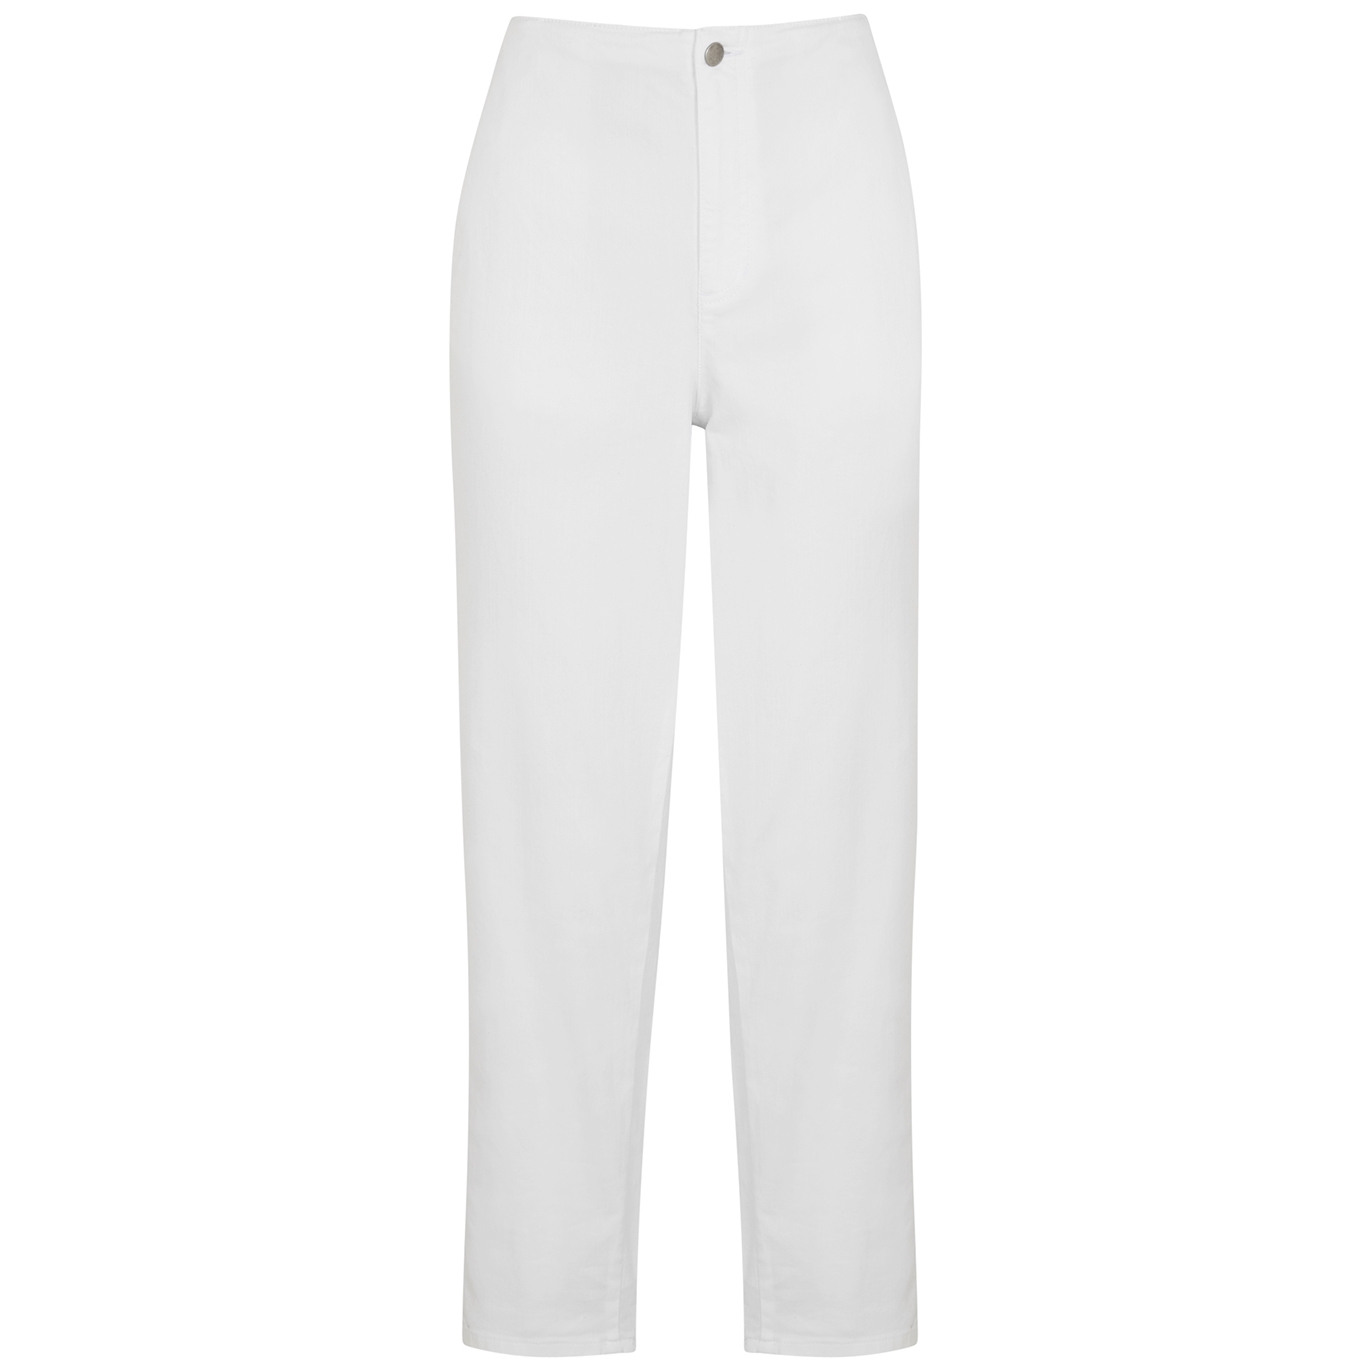 Eileen Fisher White Tapered Jeans - XS